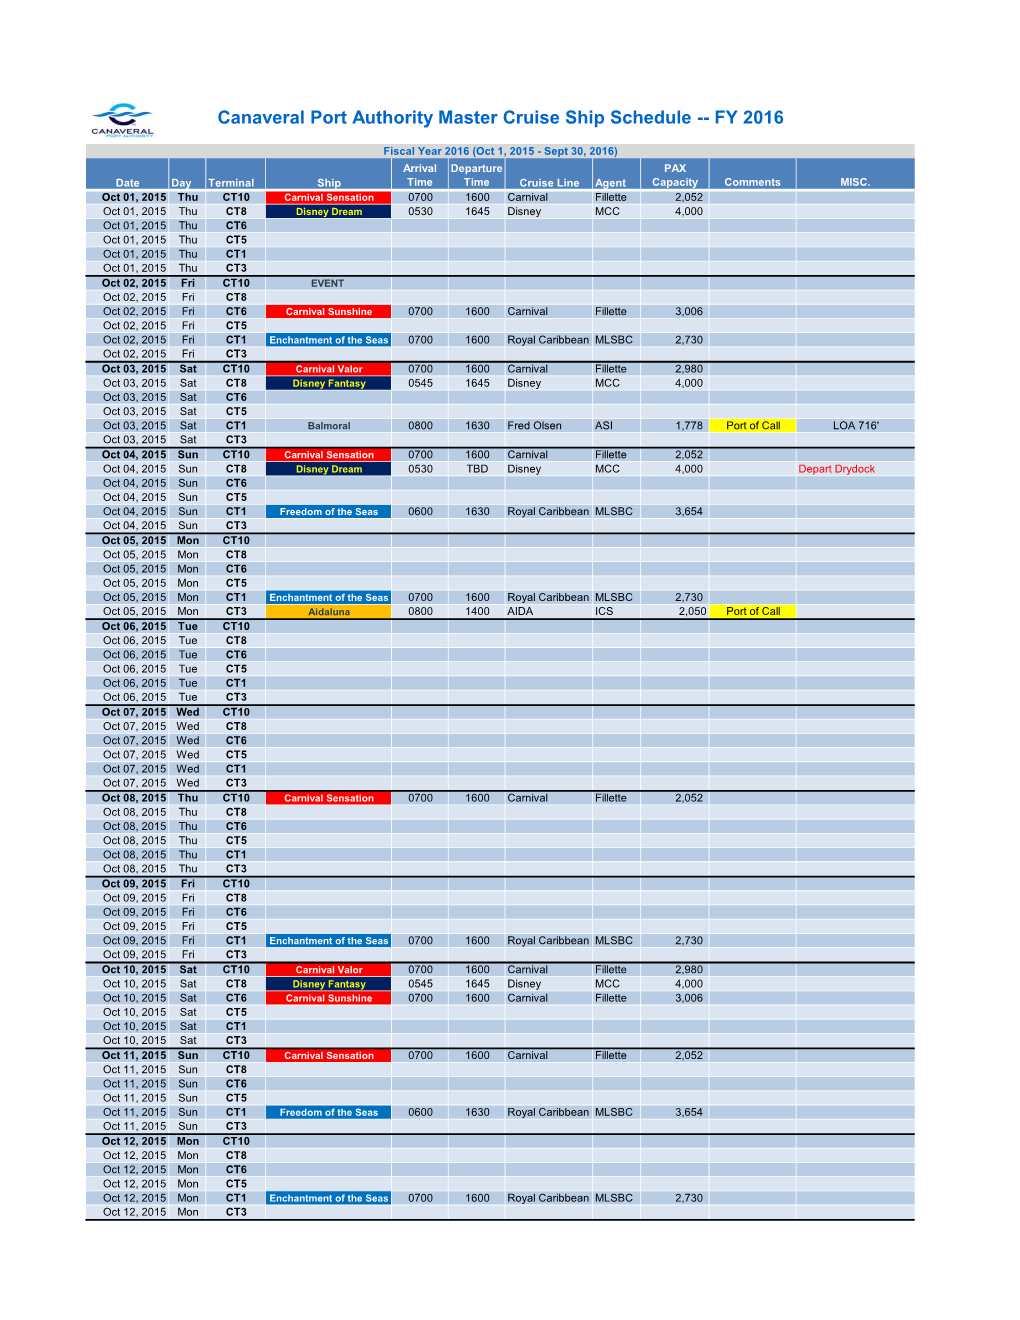 Canaveral Port Authority Master Cruise Ship Schedule -- FY 2016